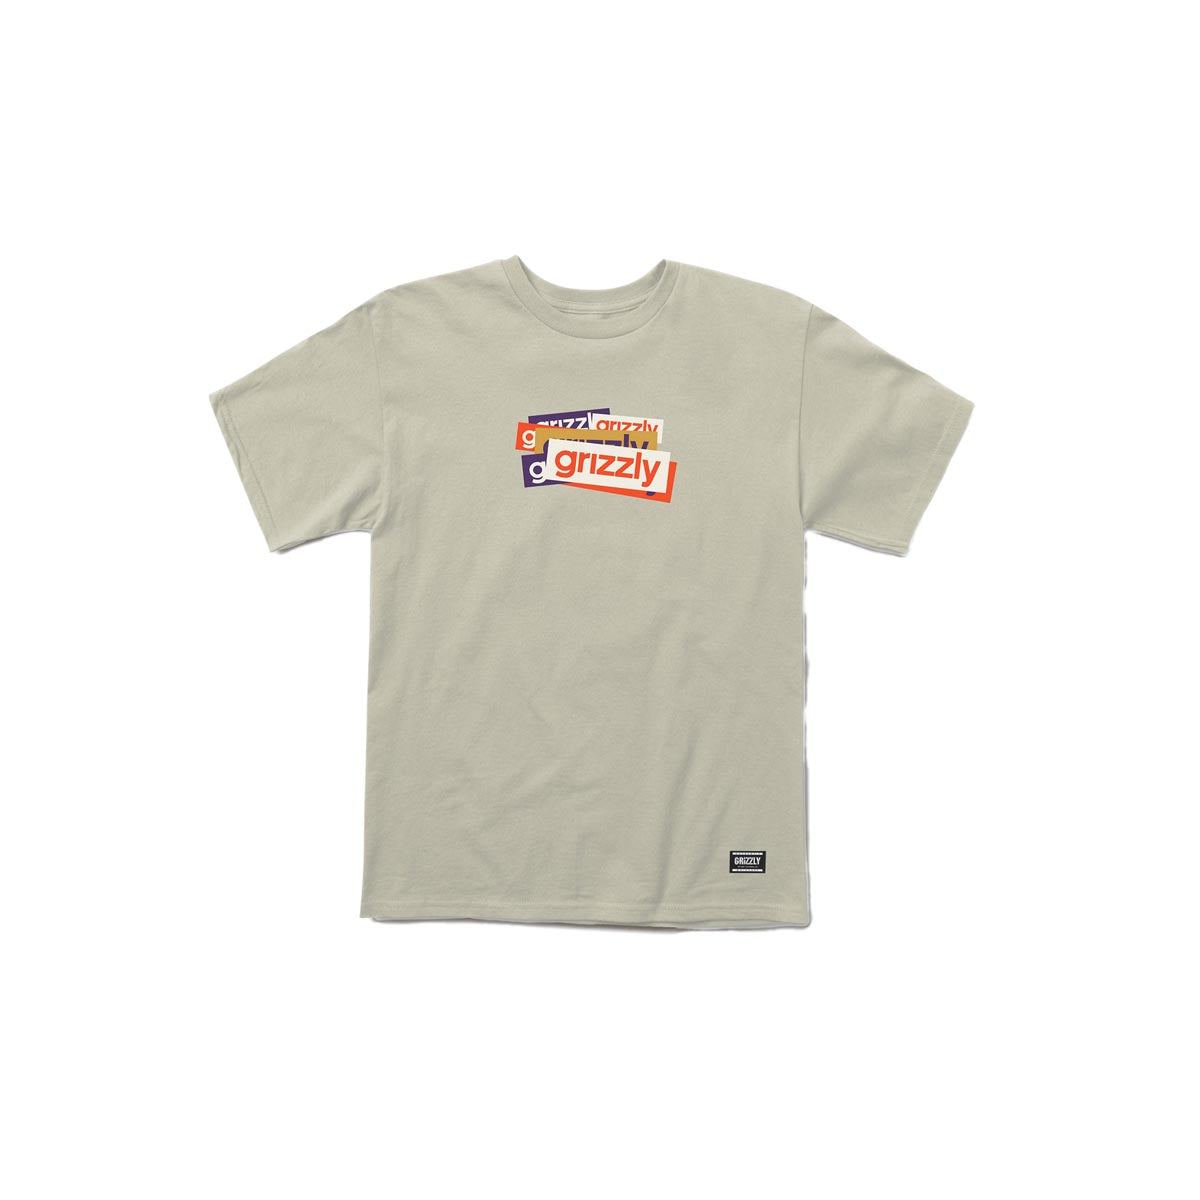 Grizzly Overlap T-Shirt - Cream image 1